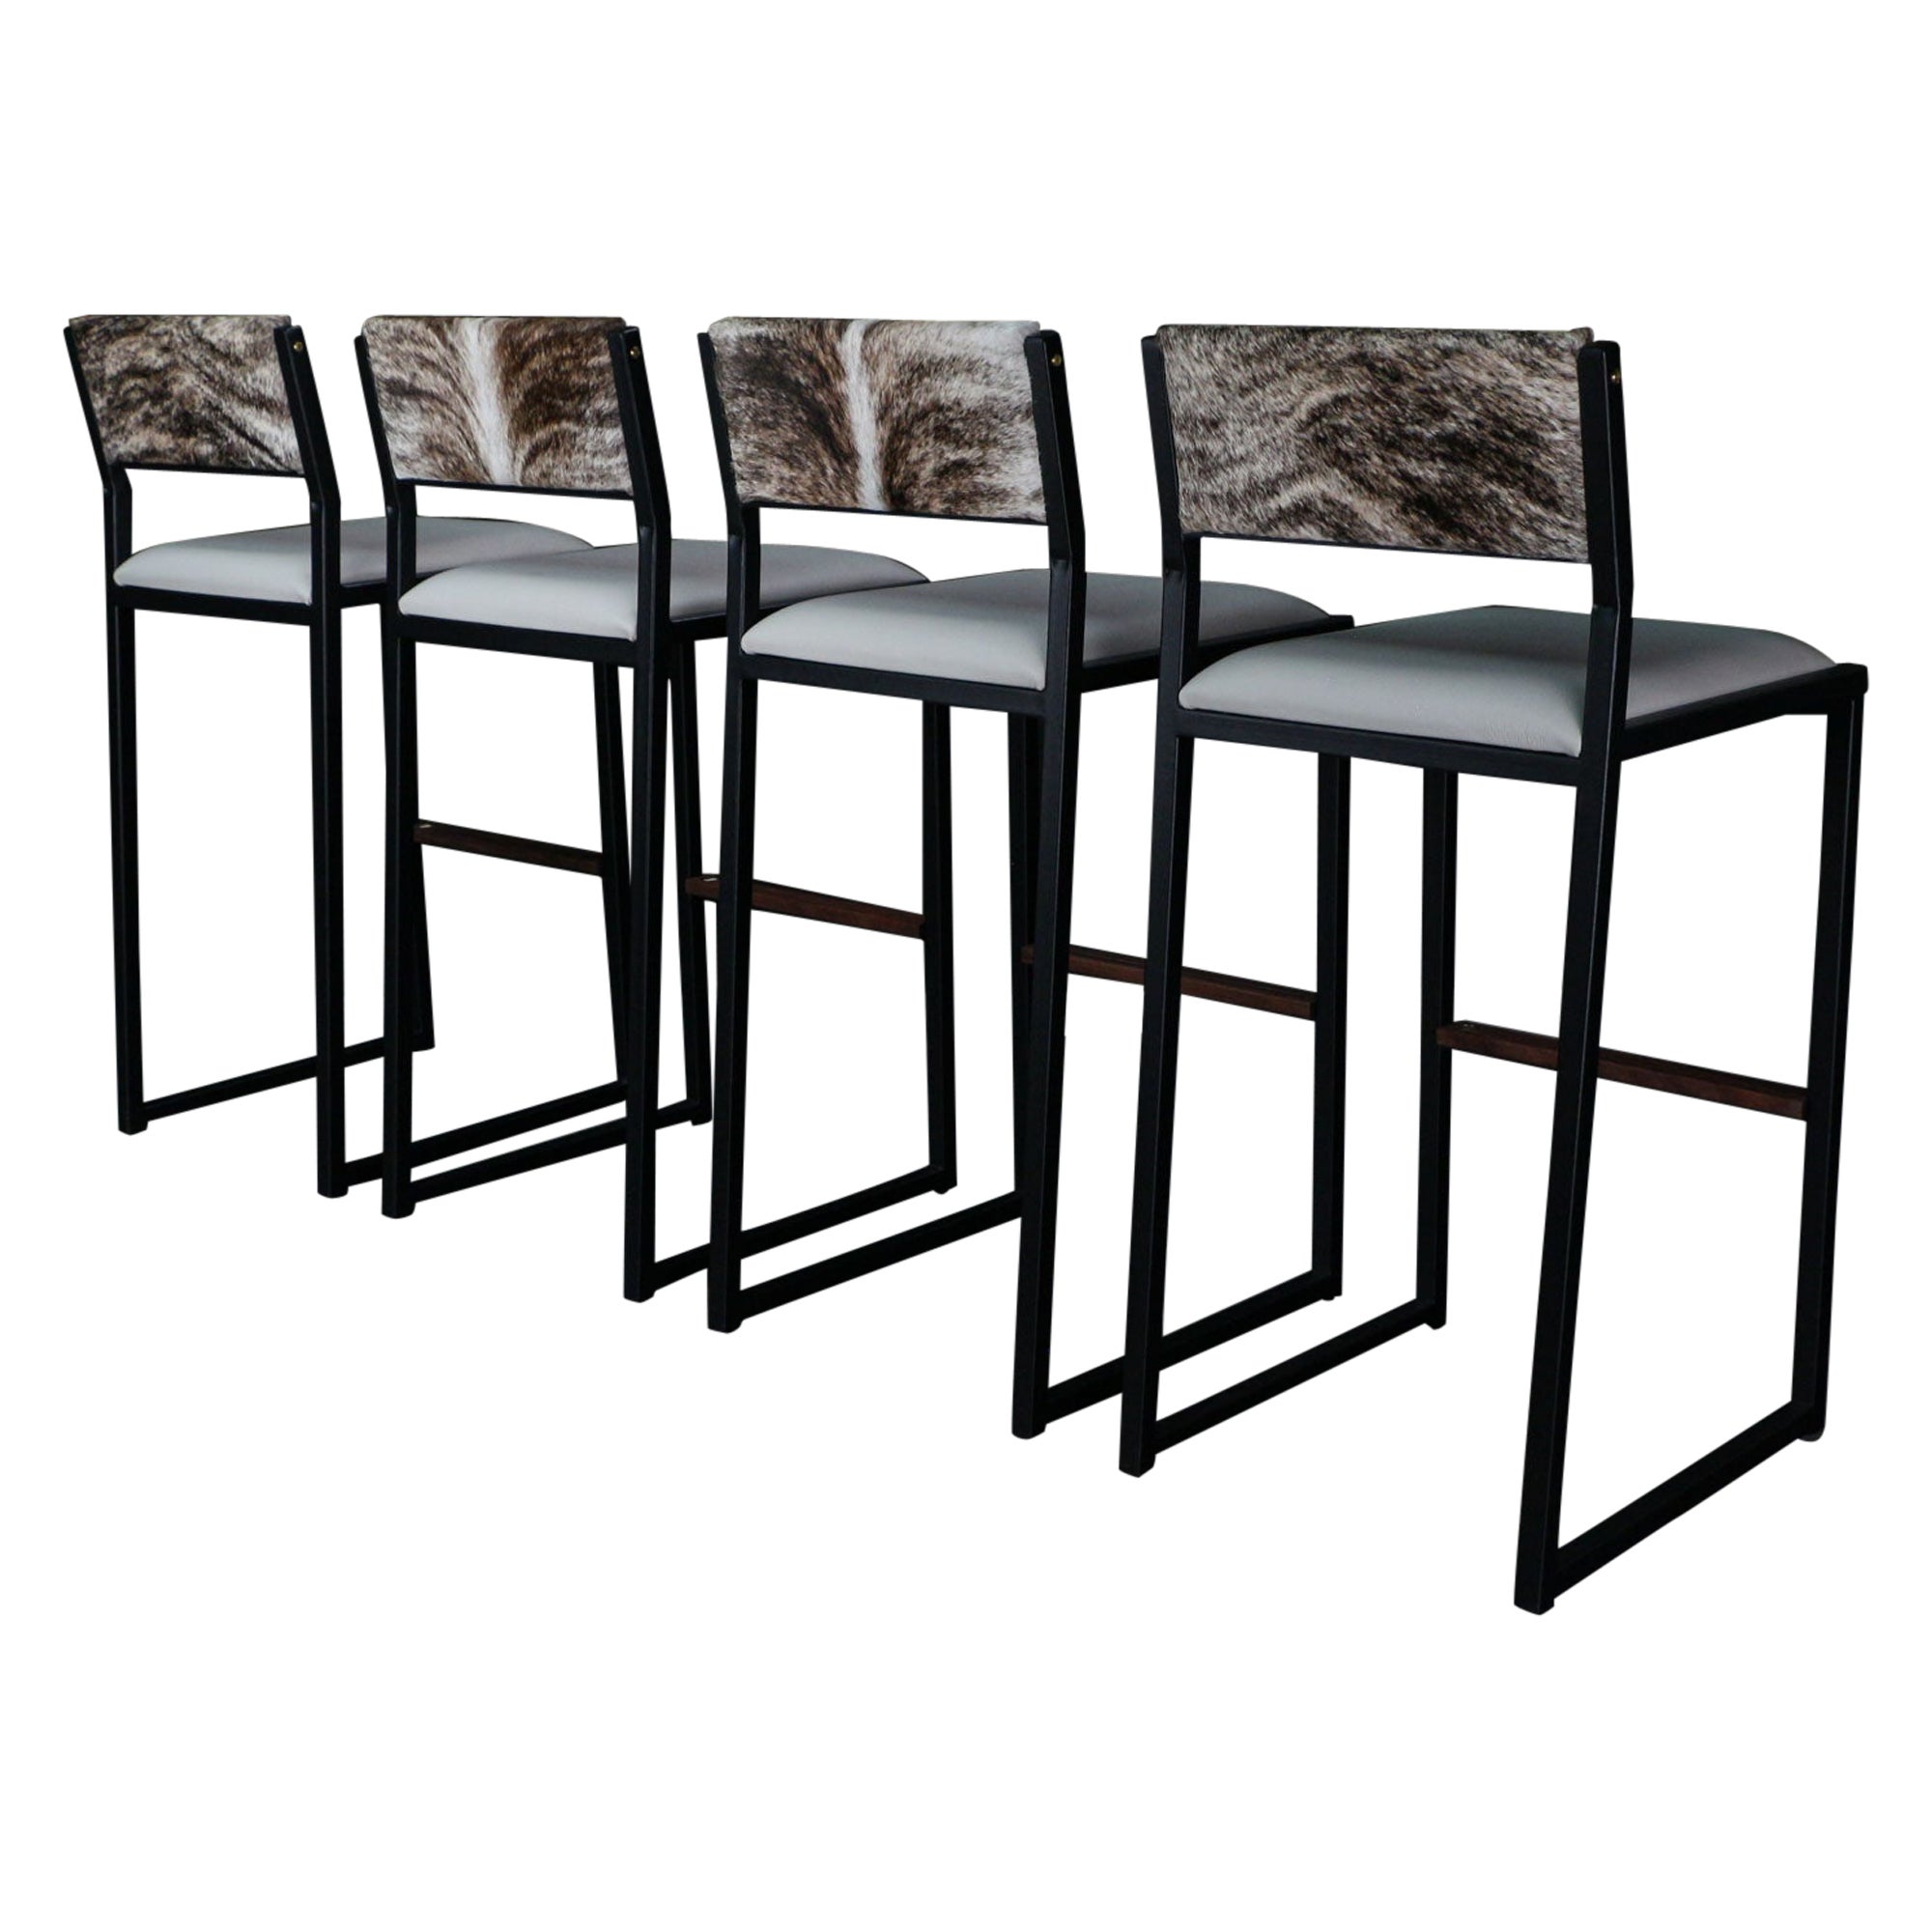 4x Shaker Bar Stools by AMBROZIA, Walnut, Greige Leather, Grey Brindle Cowhide For Sale